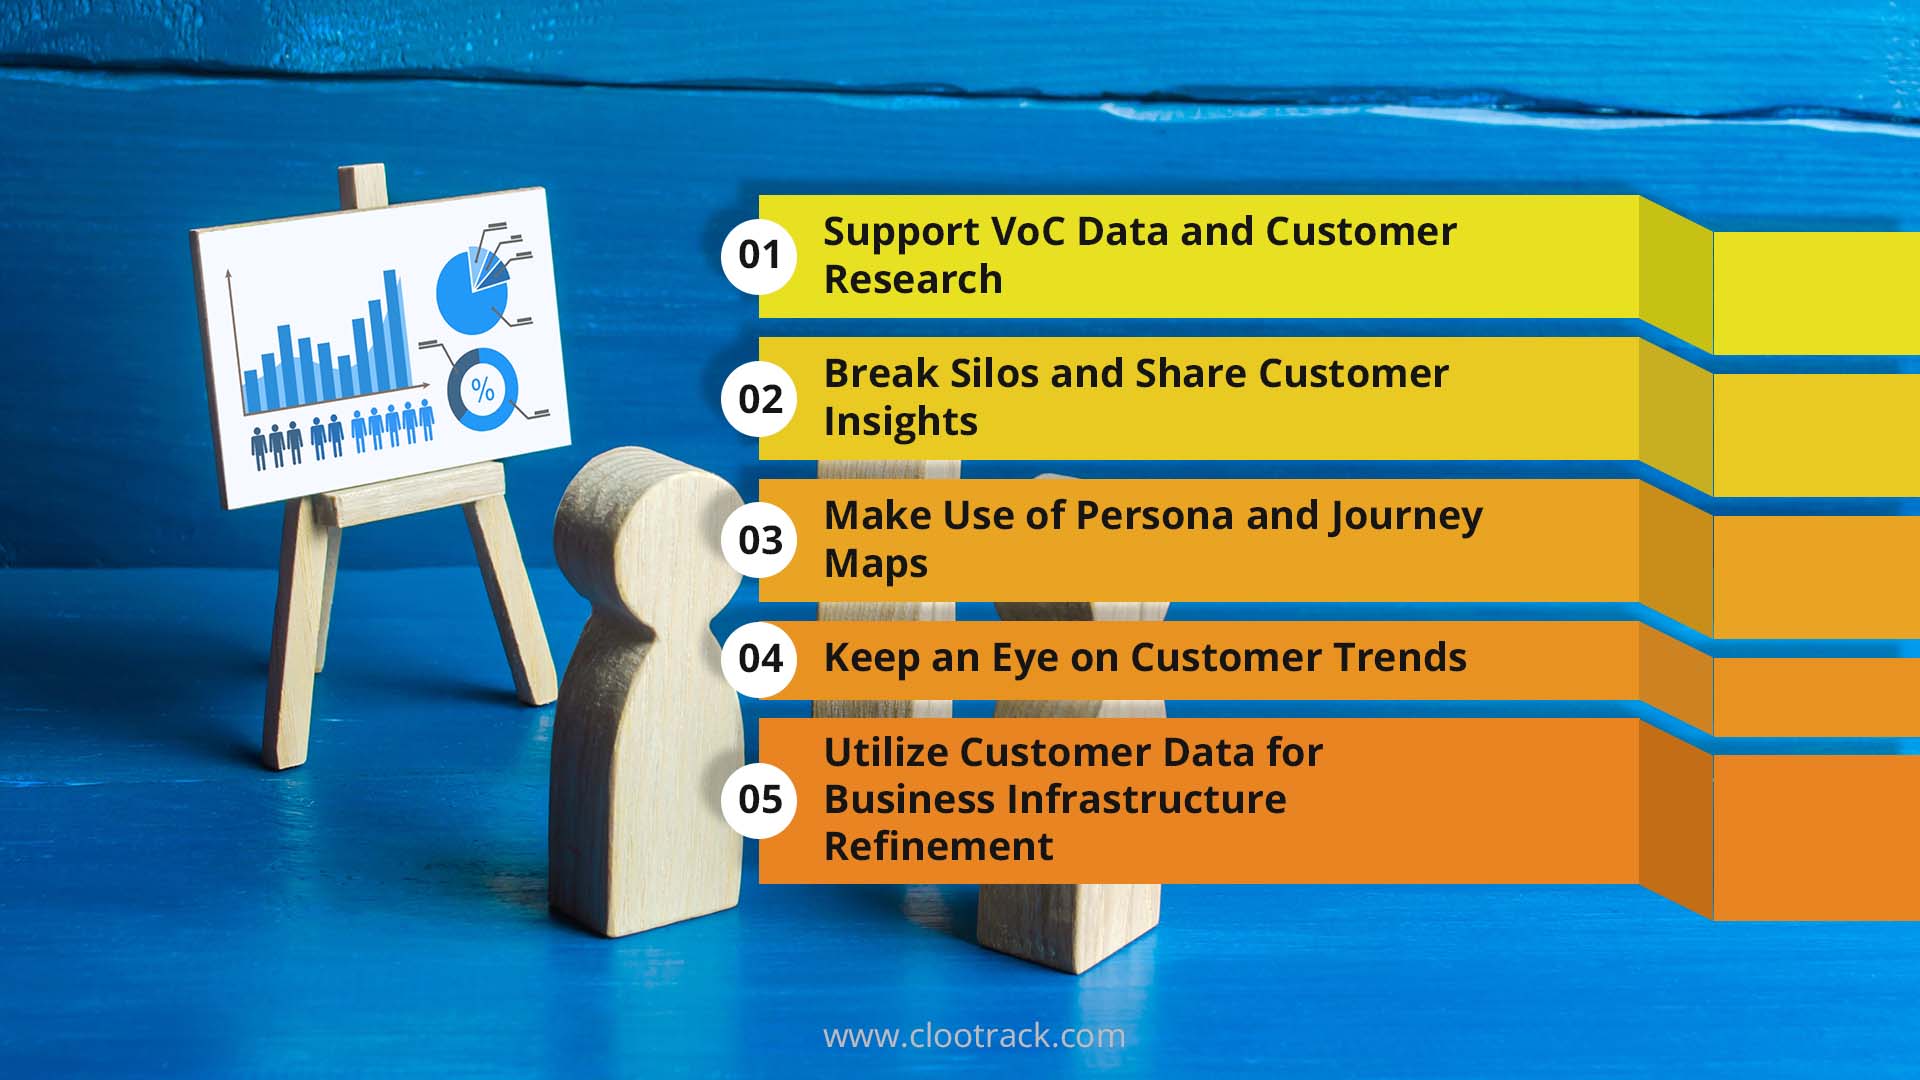 5 Things Leaders Do To Promote Customer-Centricity Using Customer Data